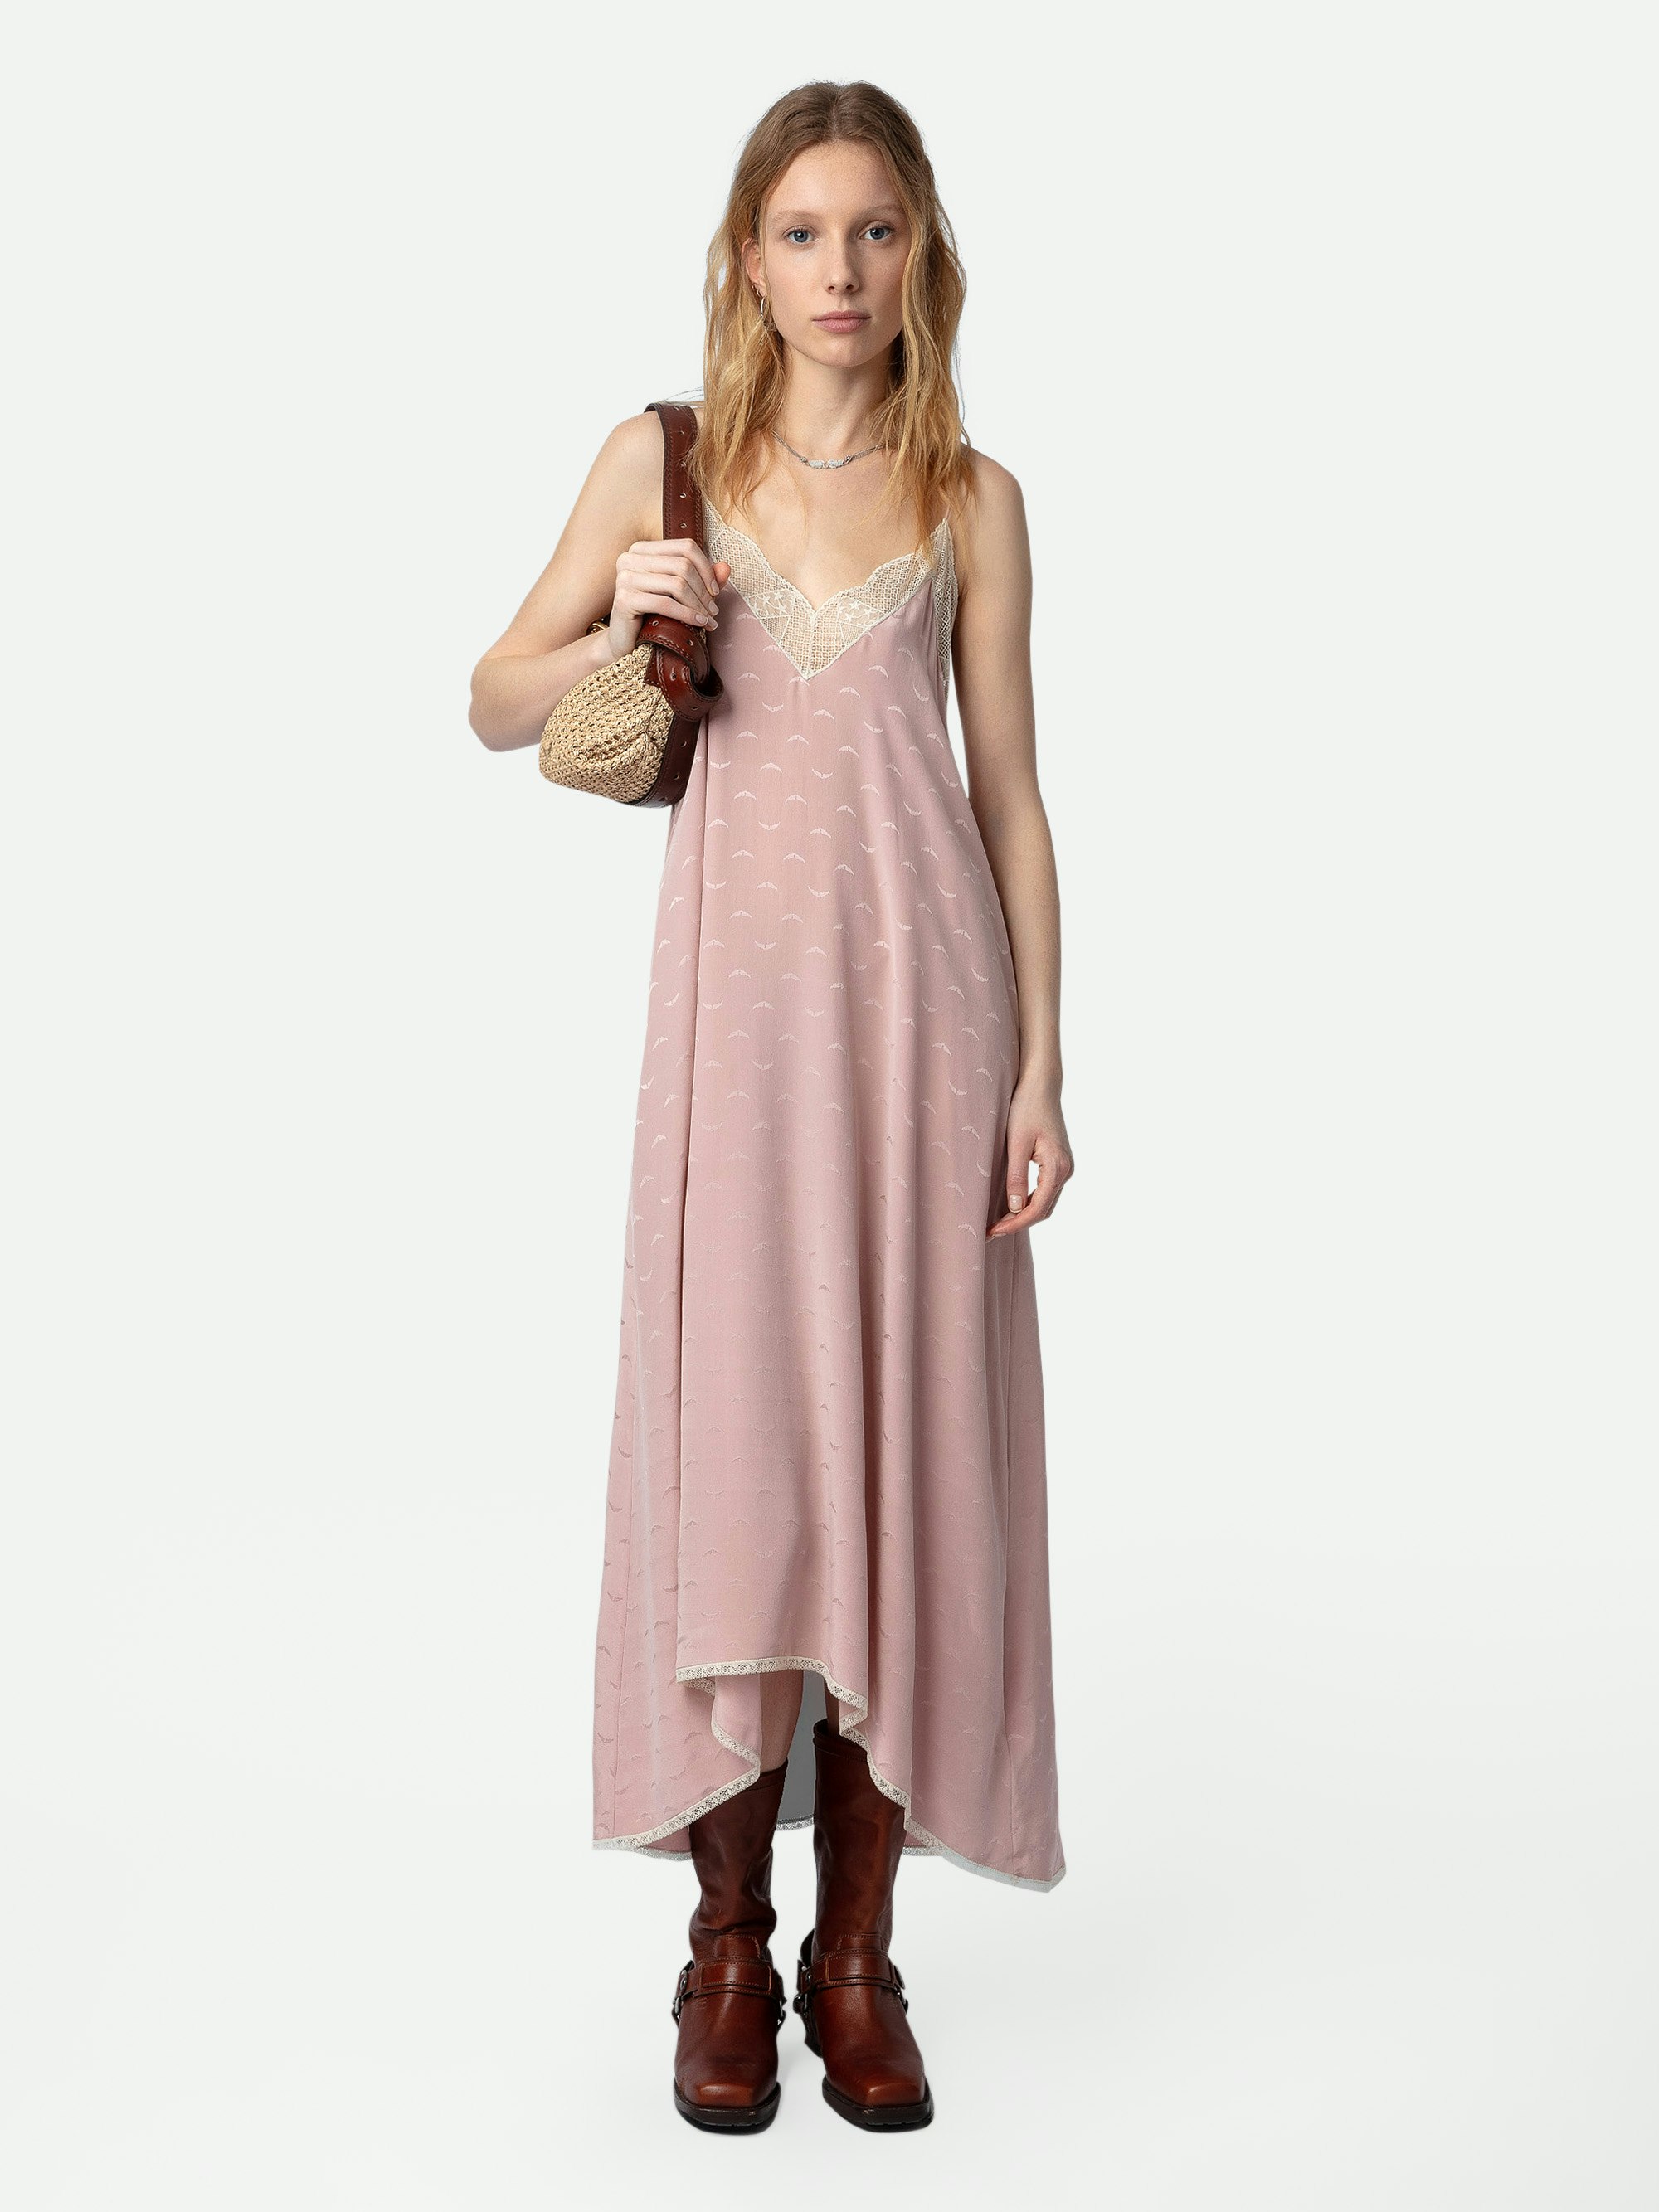 Risty Silk Jacquard Dress - Pink silk lingerie-style long dress with jacquard wings, thin straps and lace-trimmed neckline.